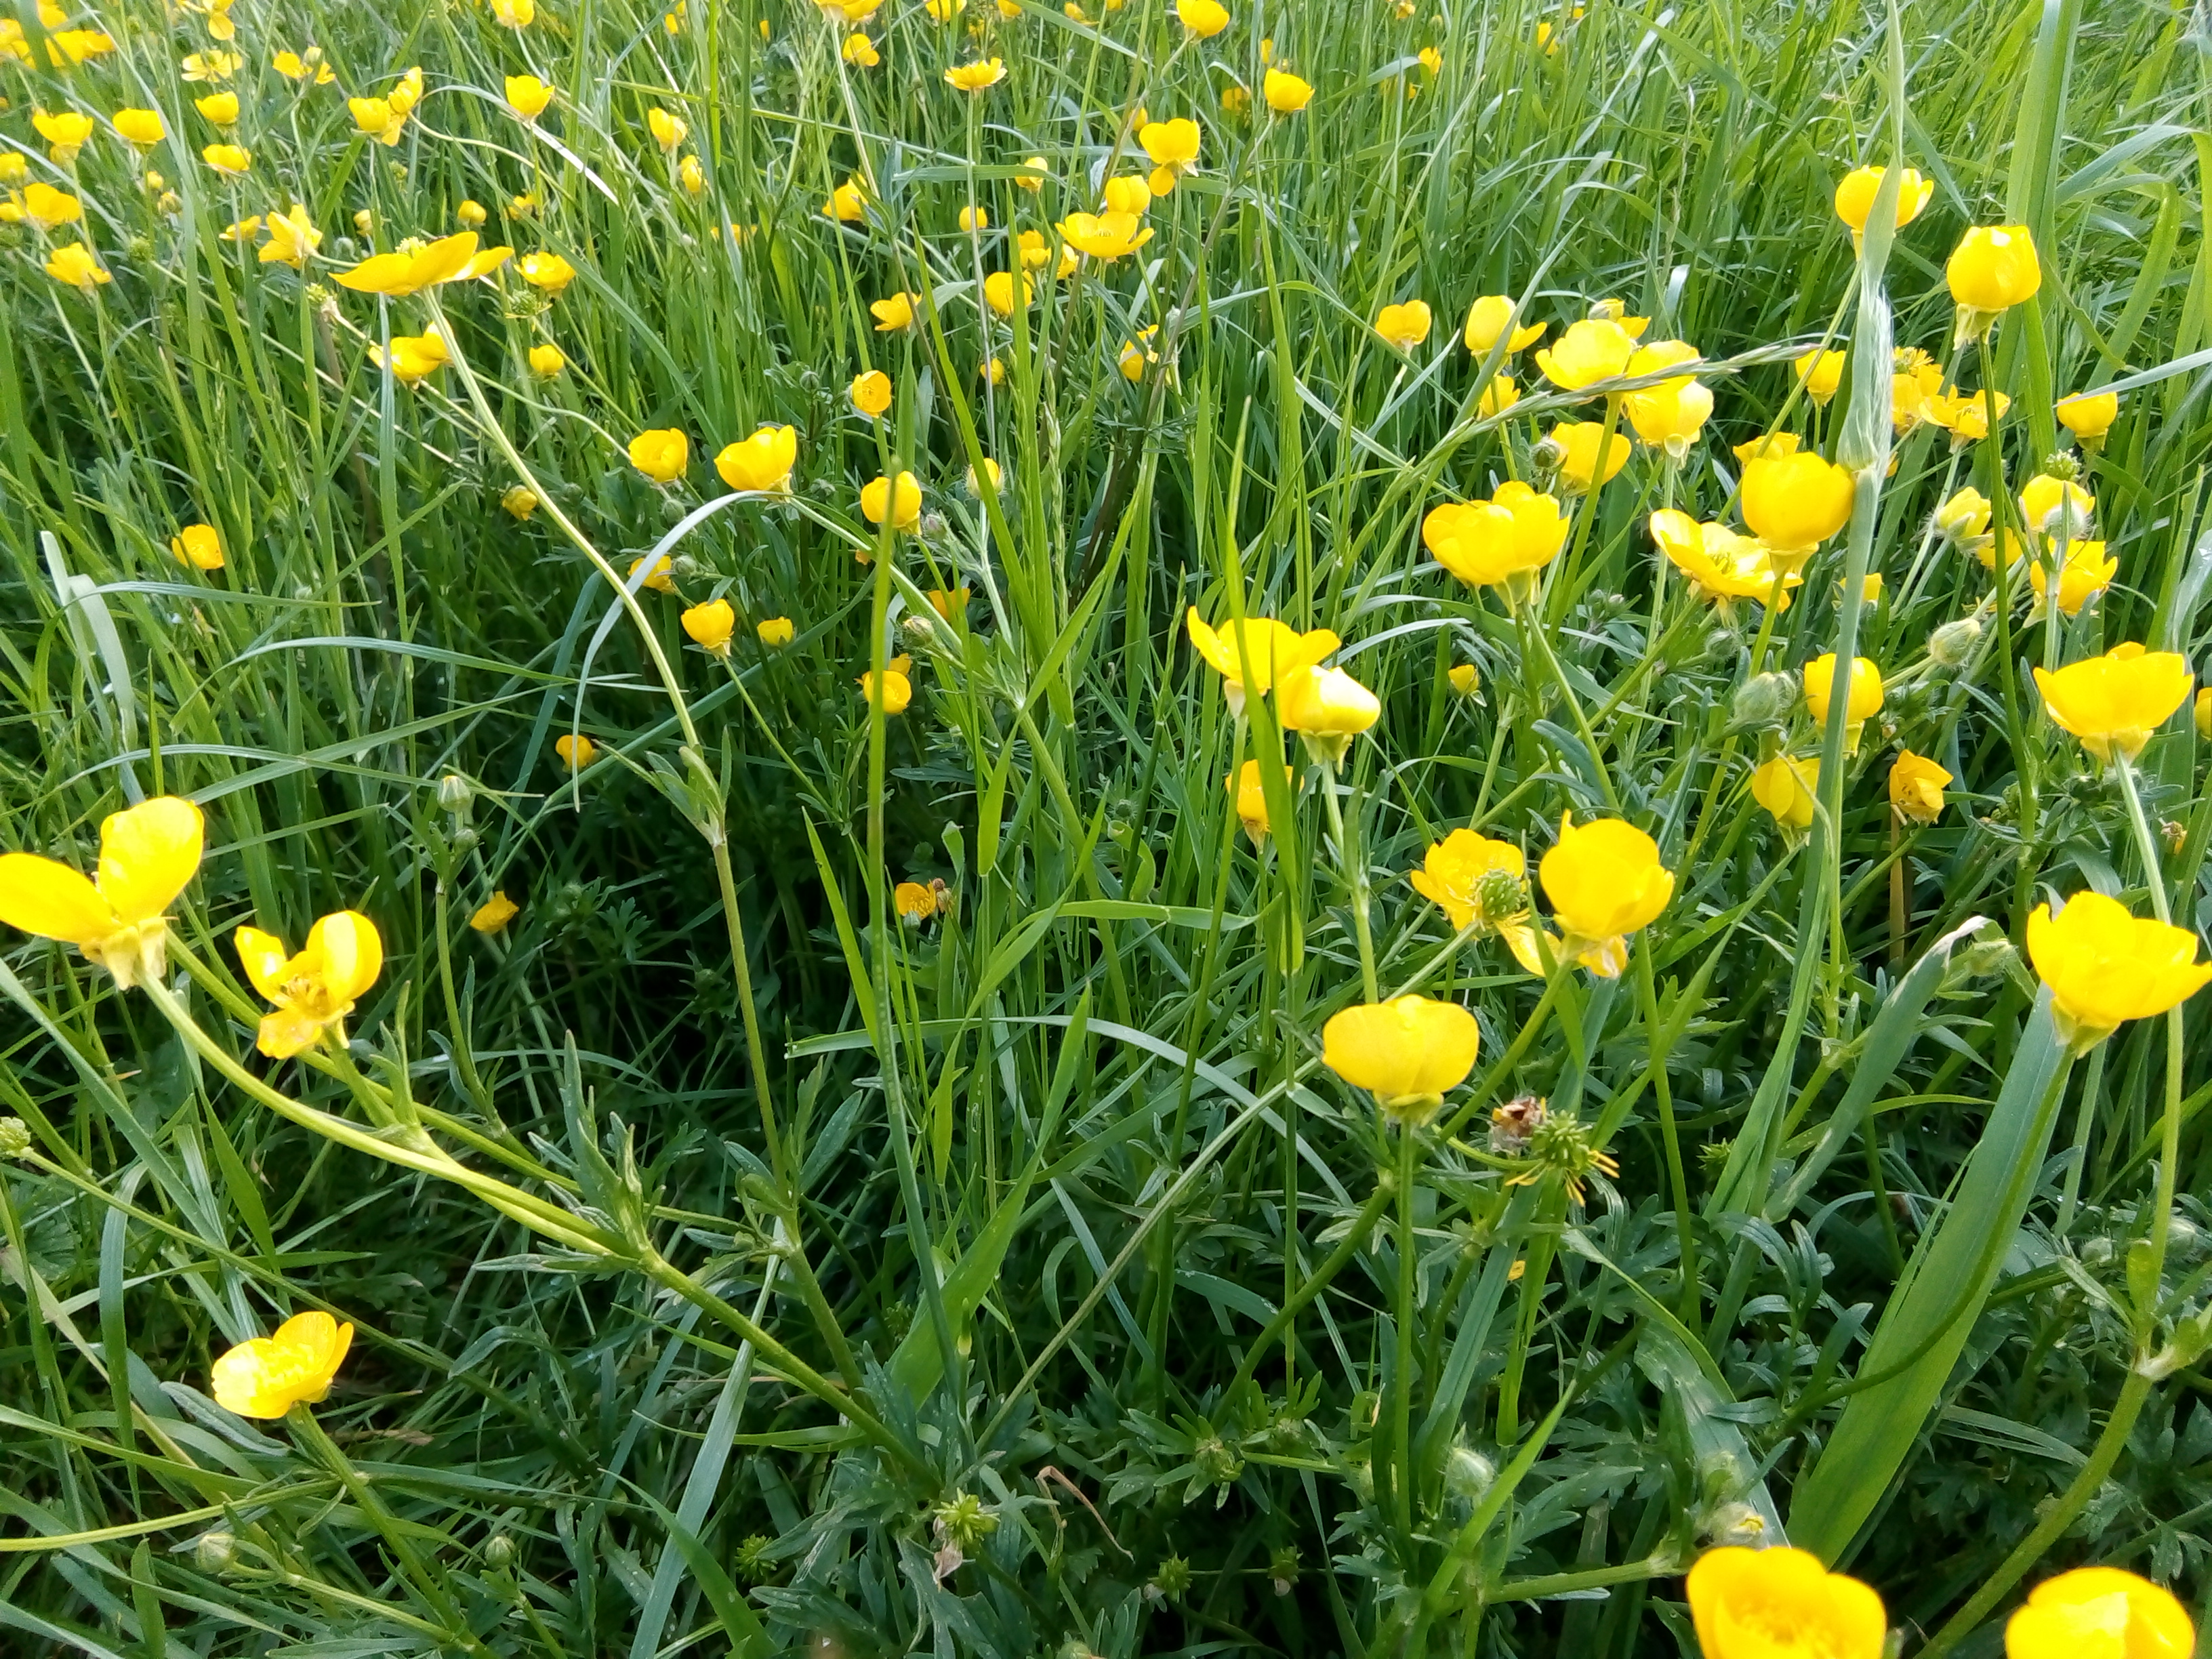 Buttercups in a field on a bright day